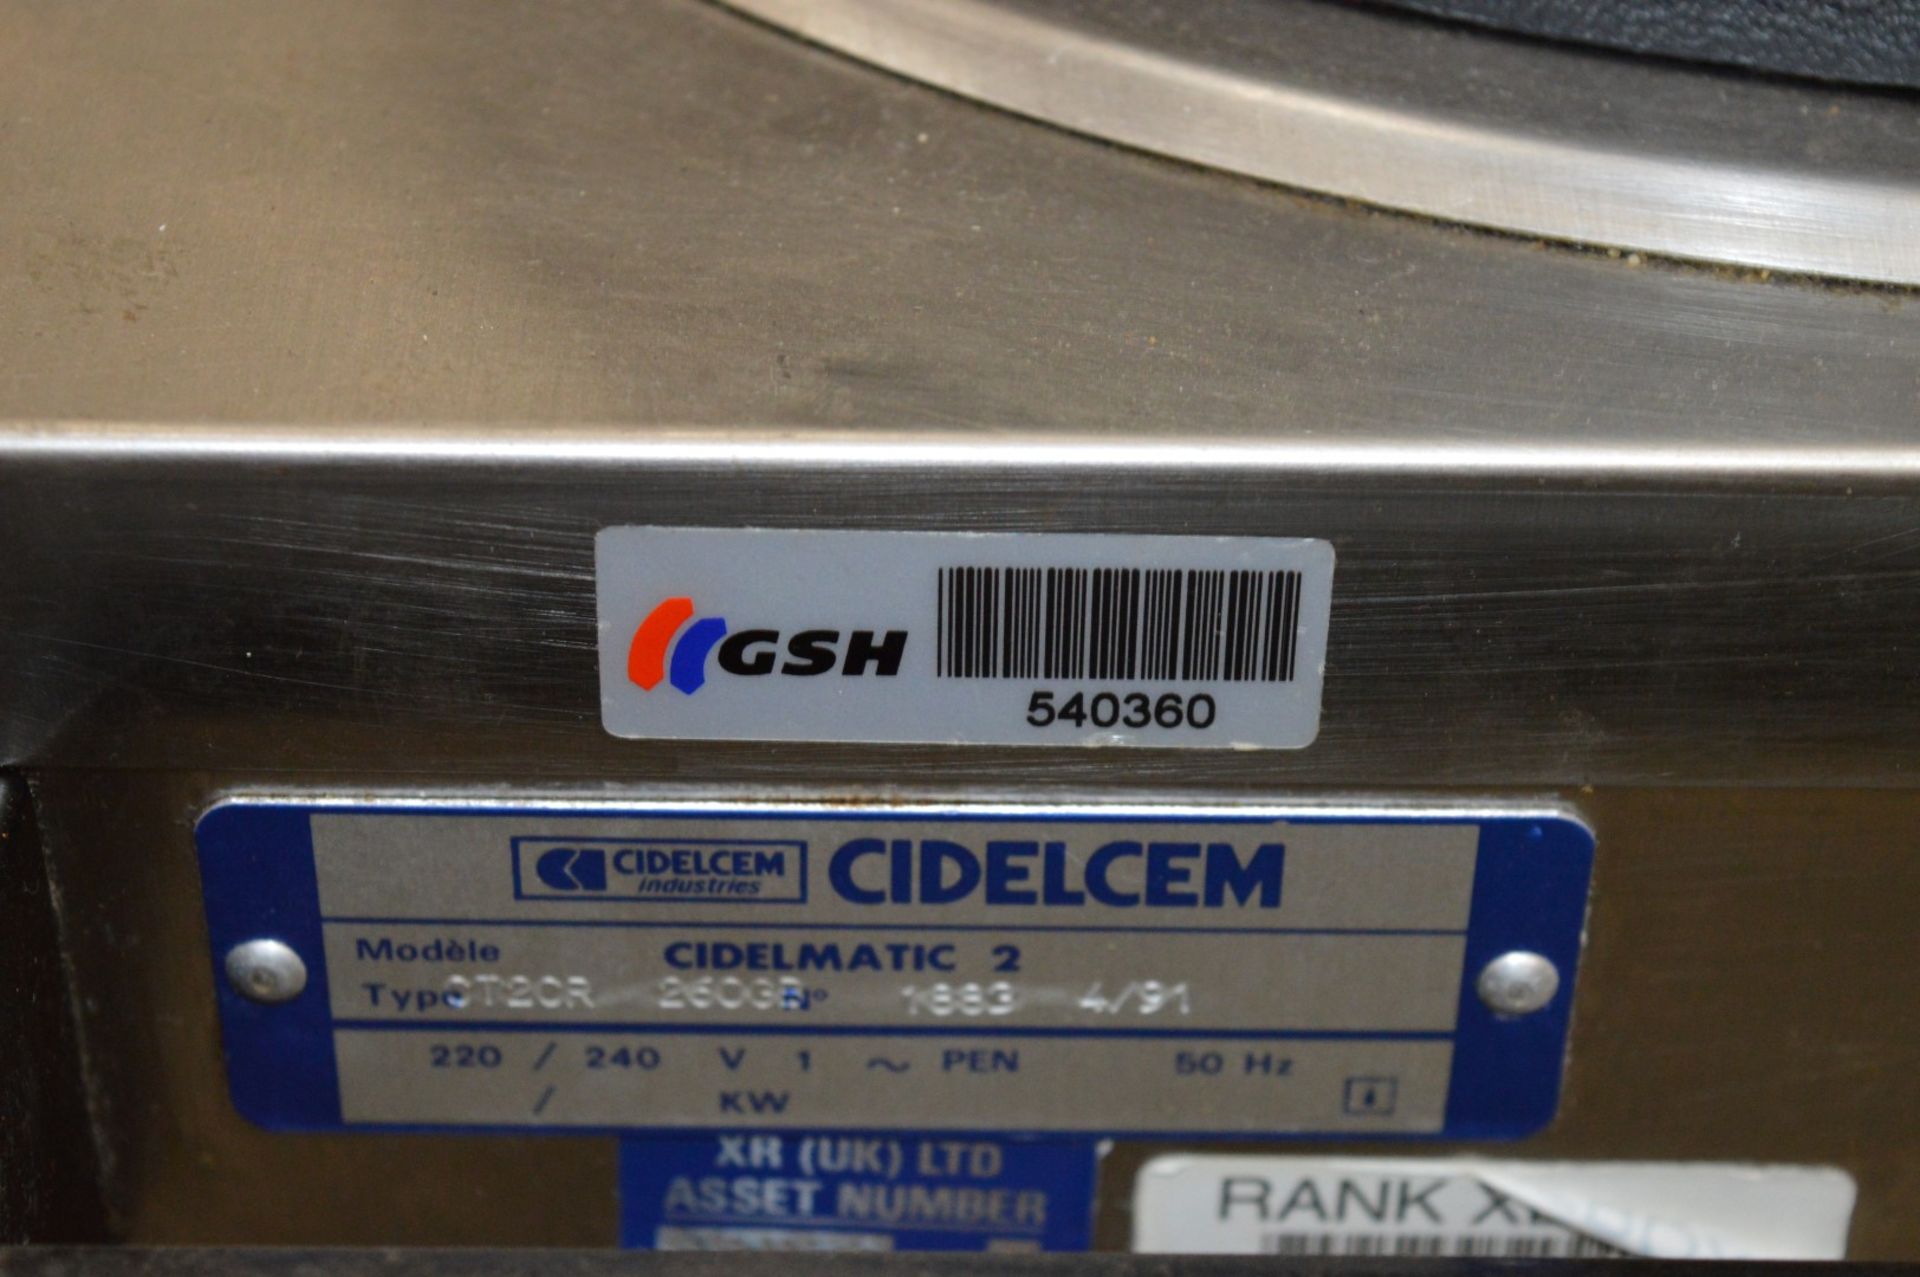 1 x Cidelcem Cidelmatic 2 Plate Warming Dispenser - Model CT2CR 260GB - On Castors - Stainless Steel - Image 3 of 7